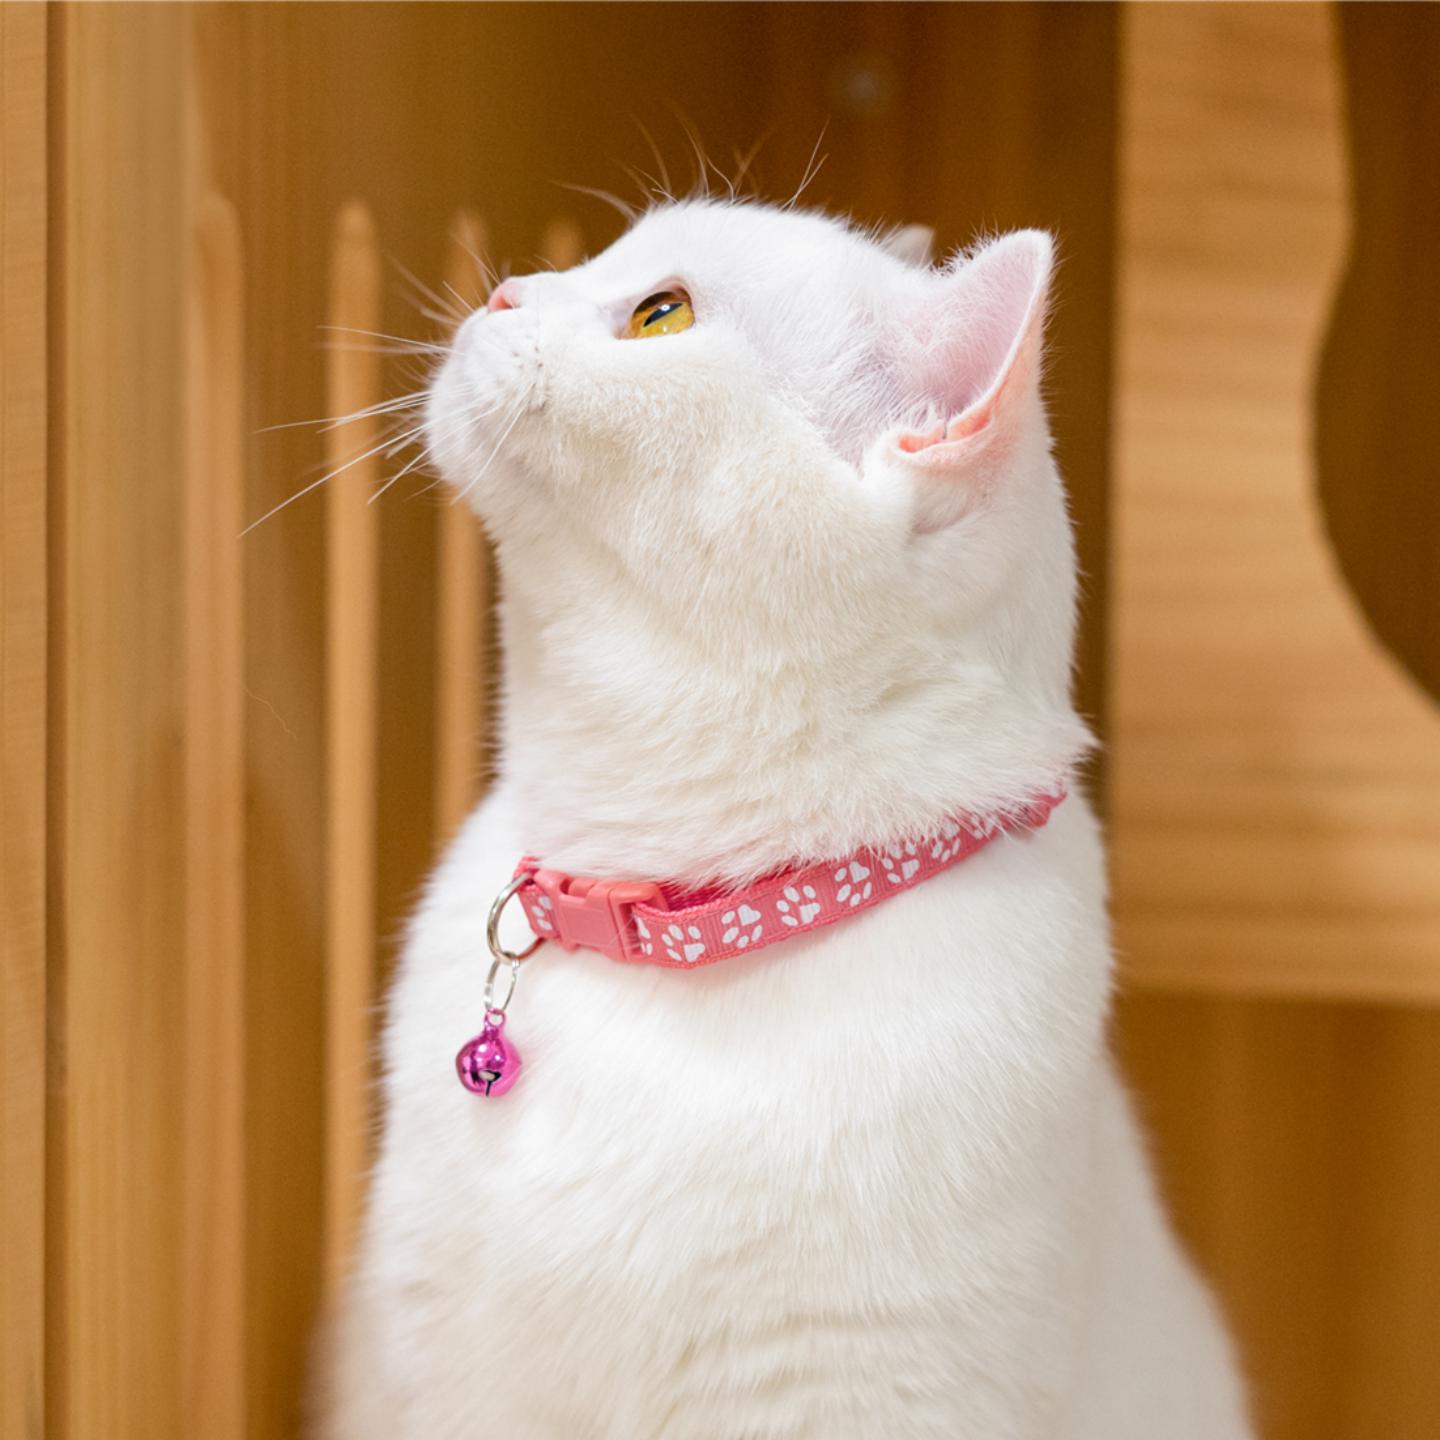 Paw print cat collar with ring bell 